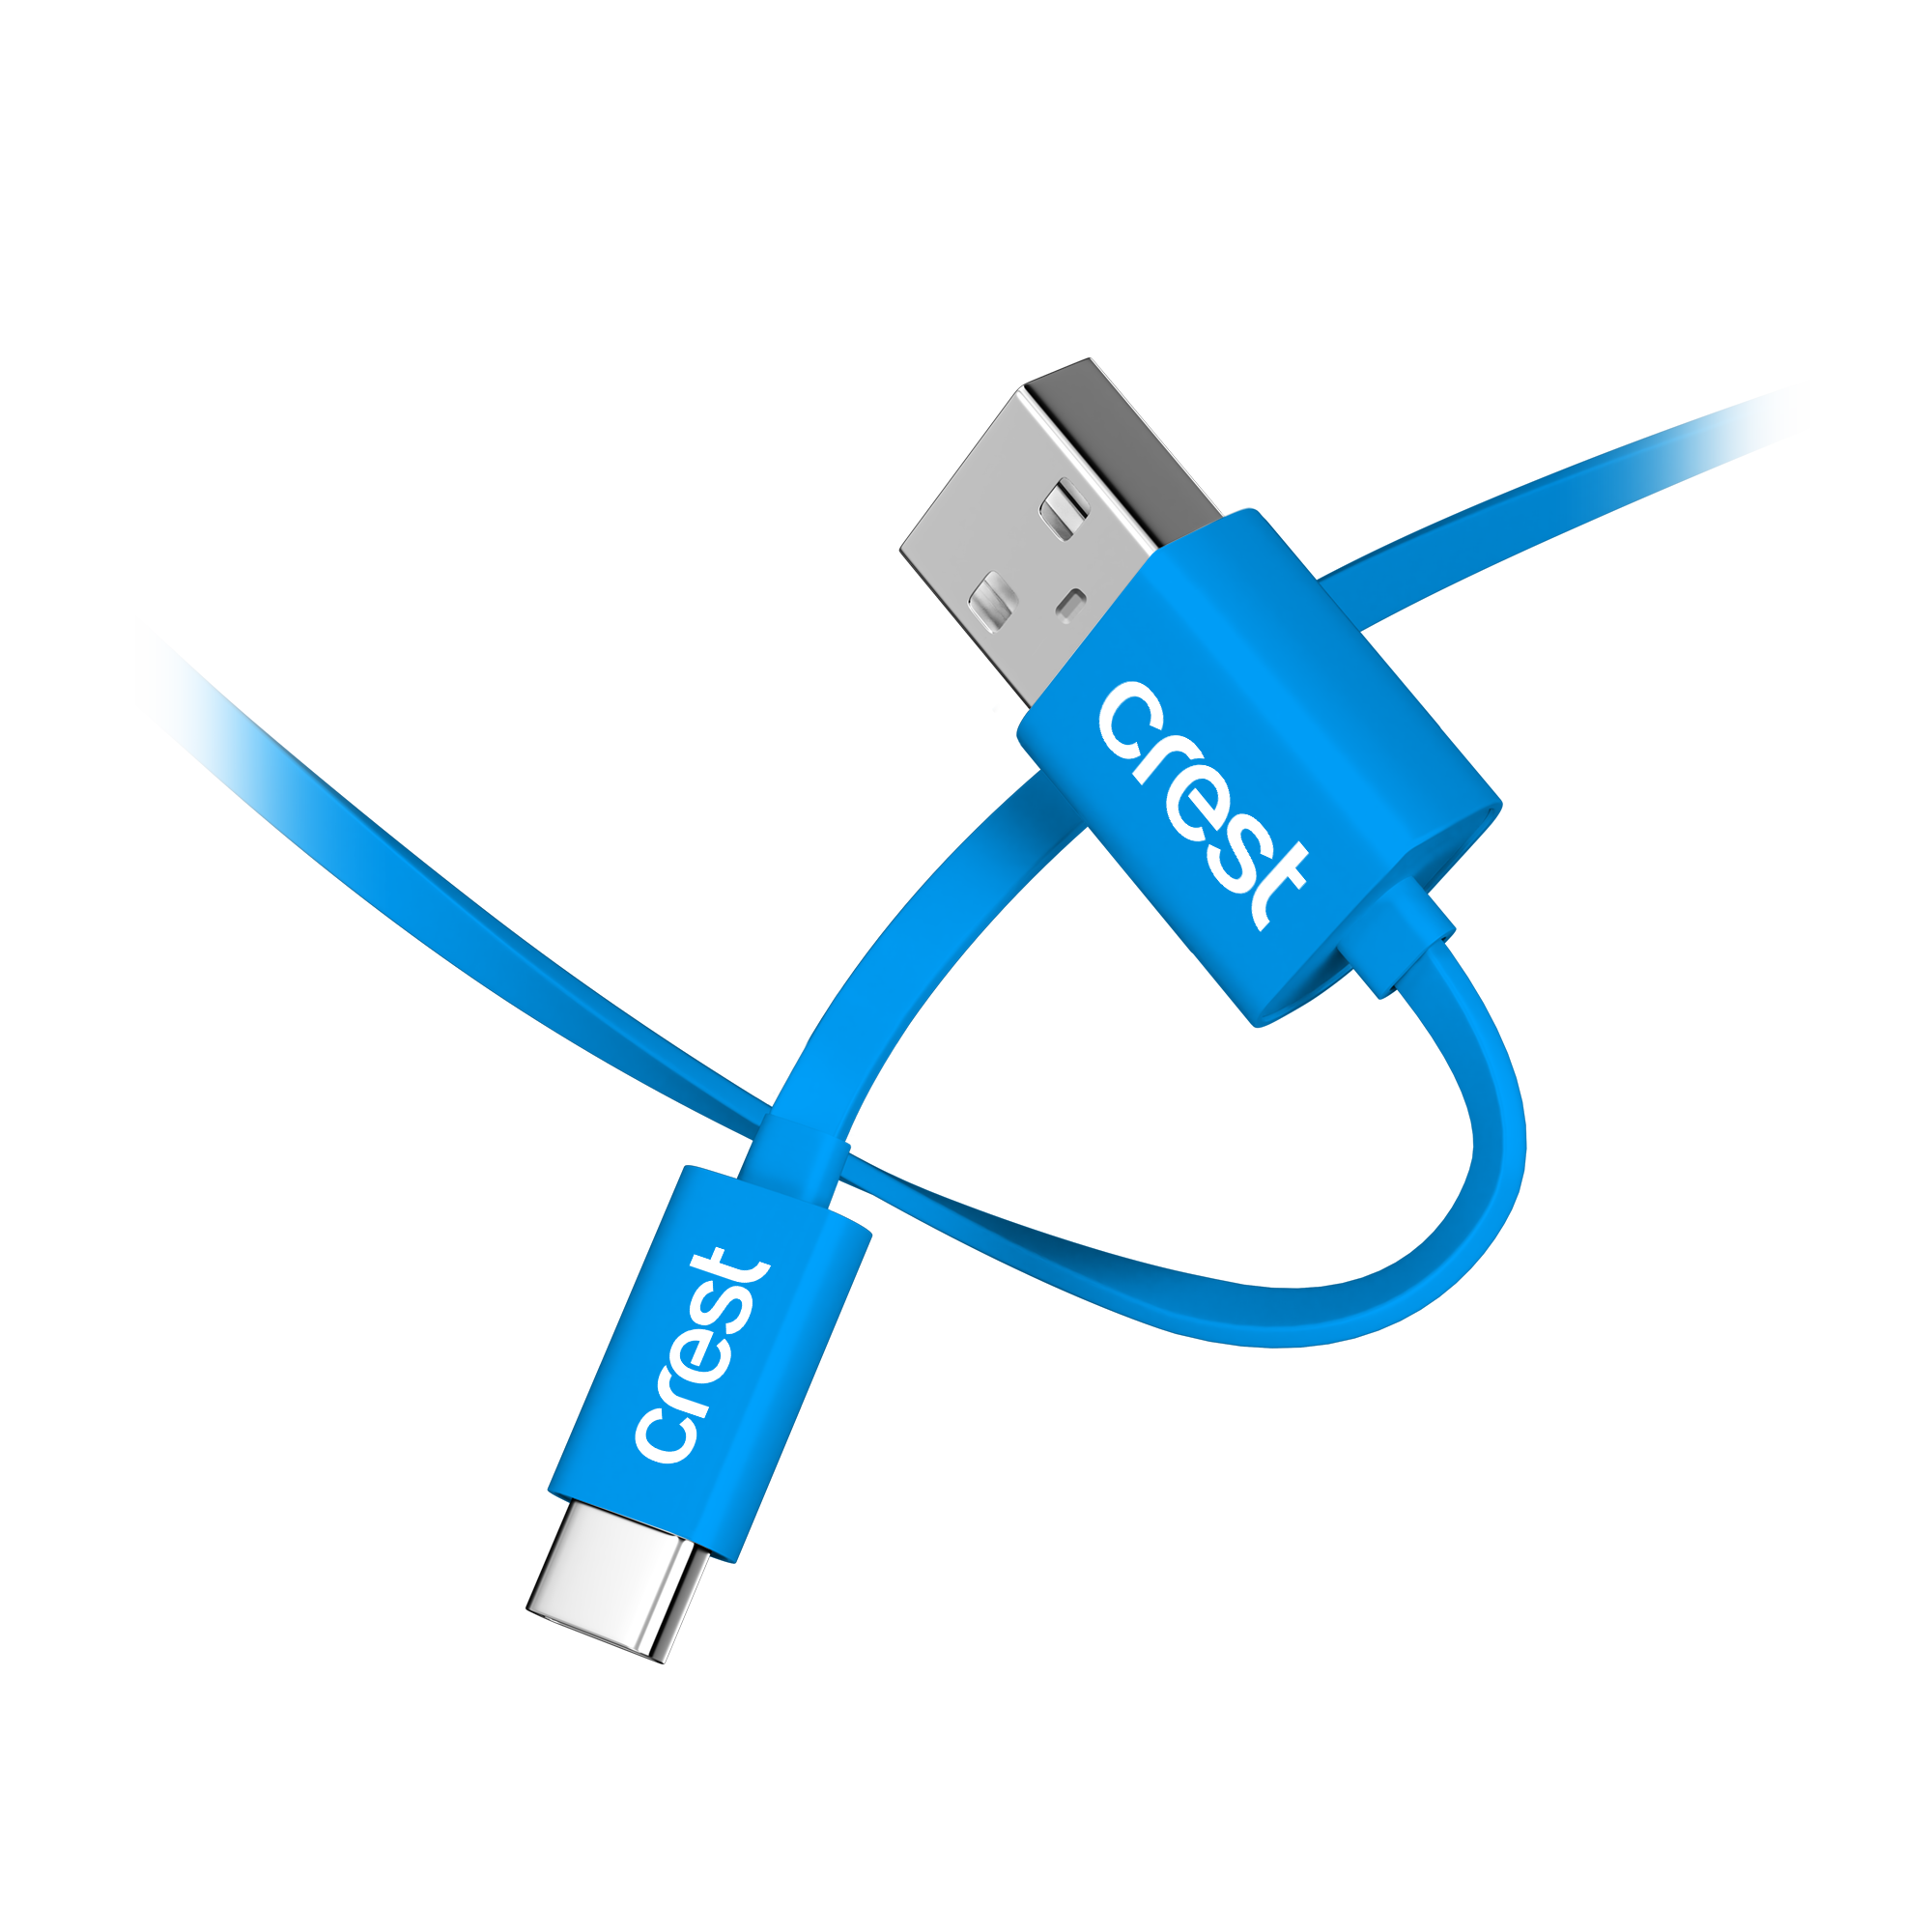 USB-C to USB-A Cable 1.2M - Blue